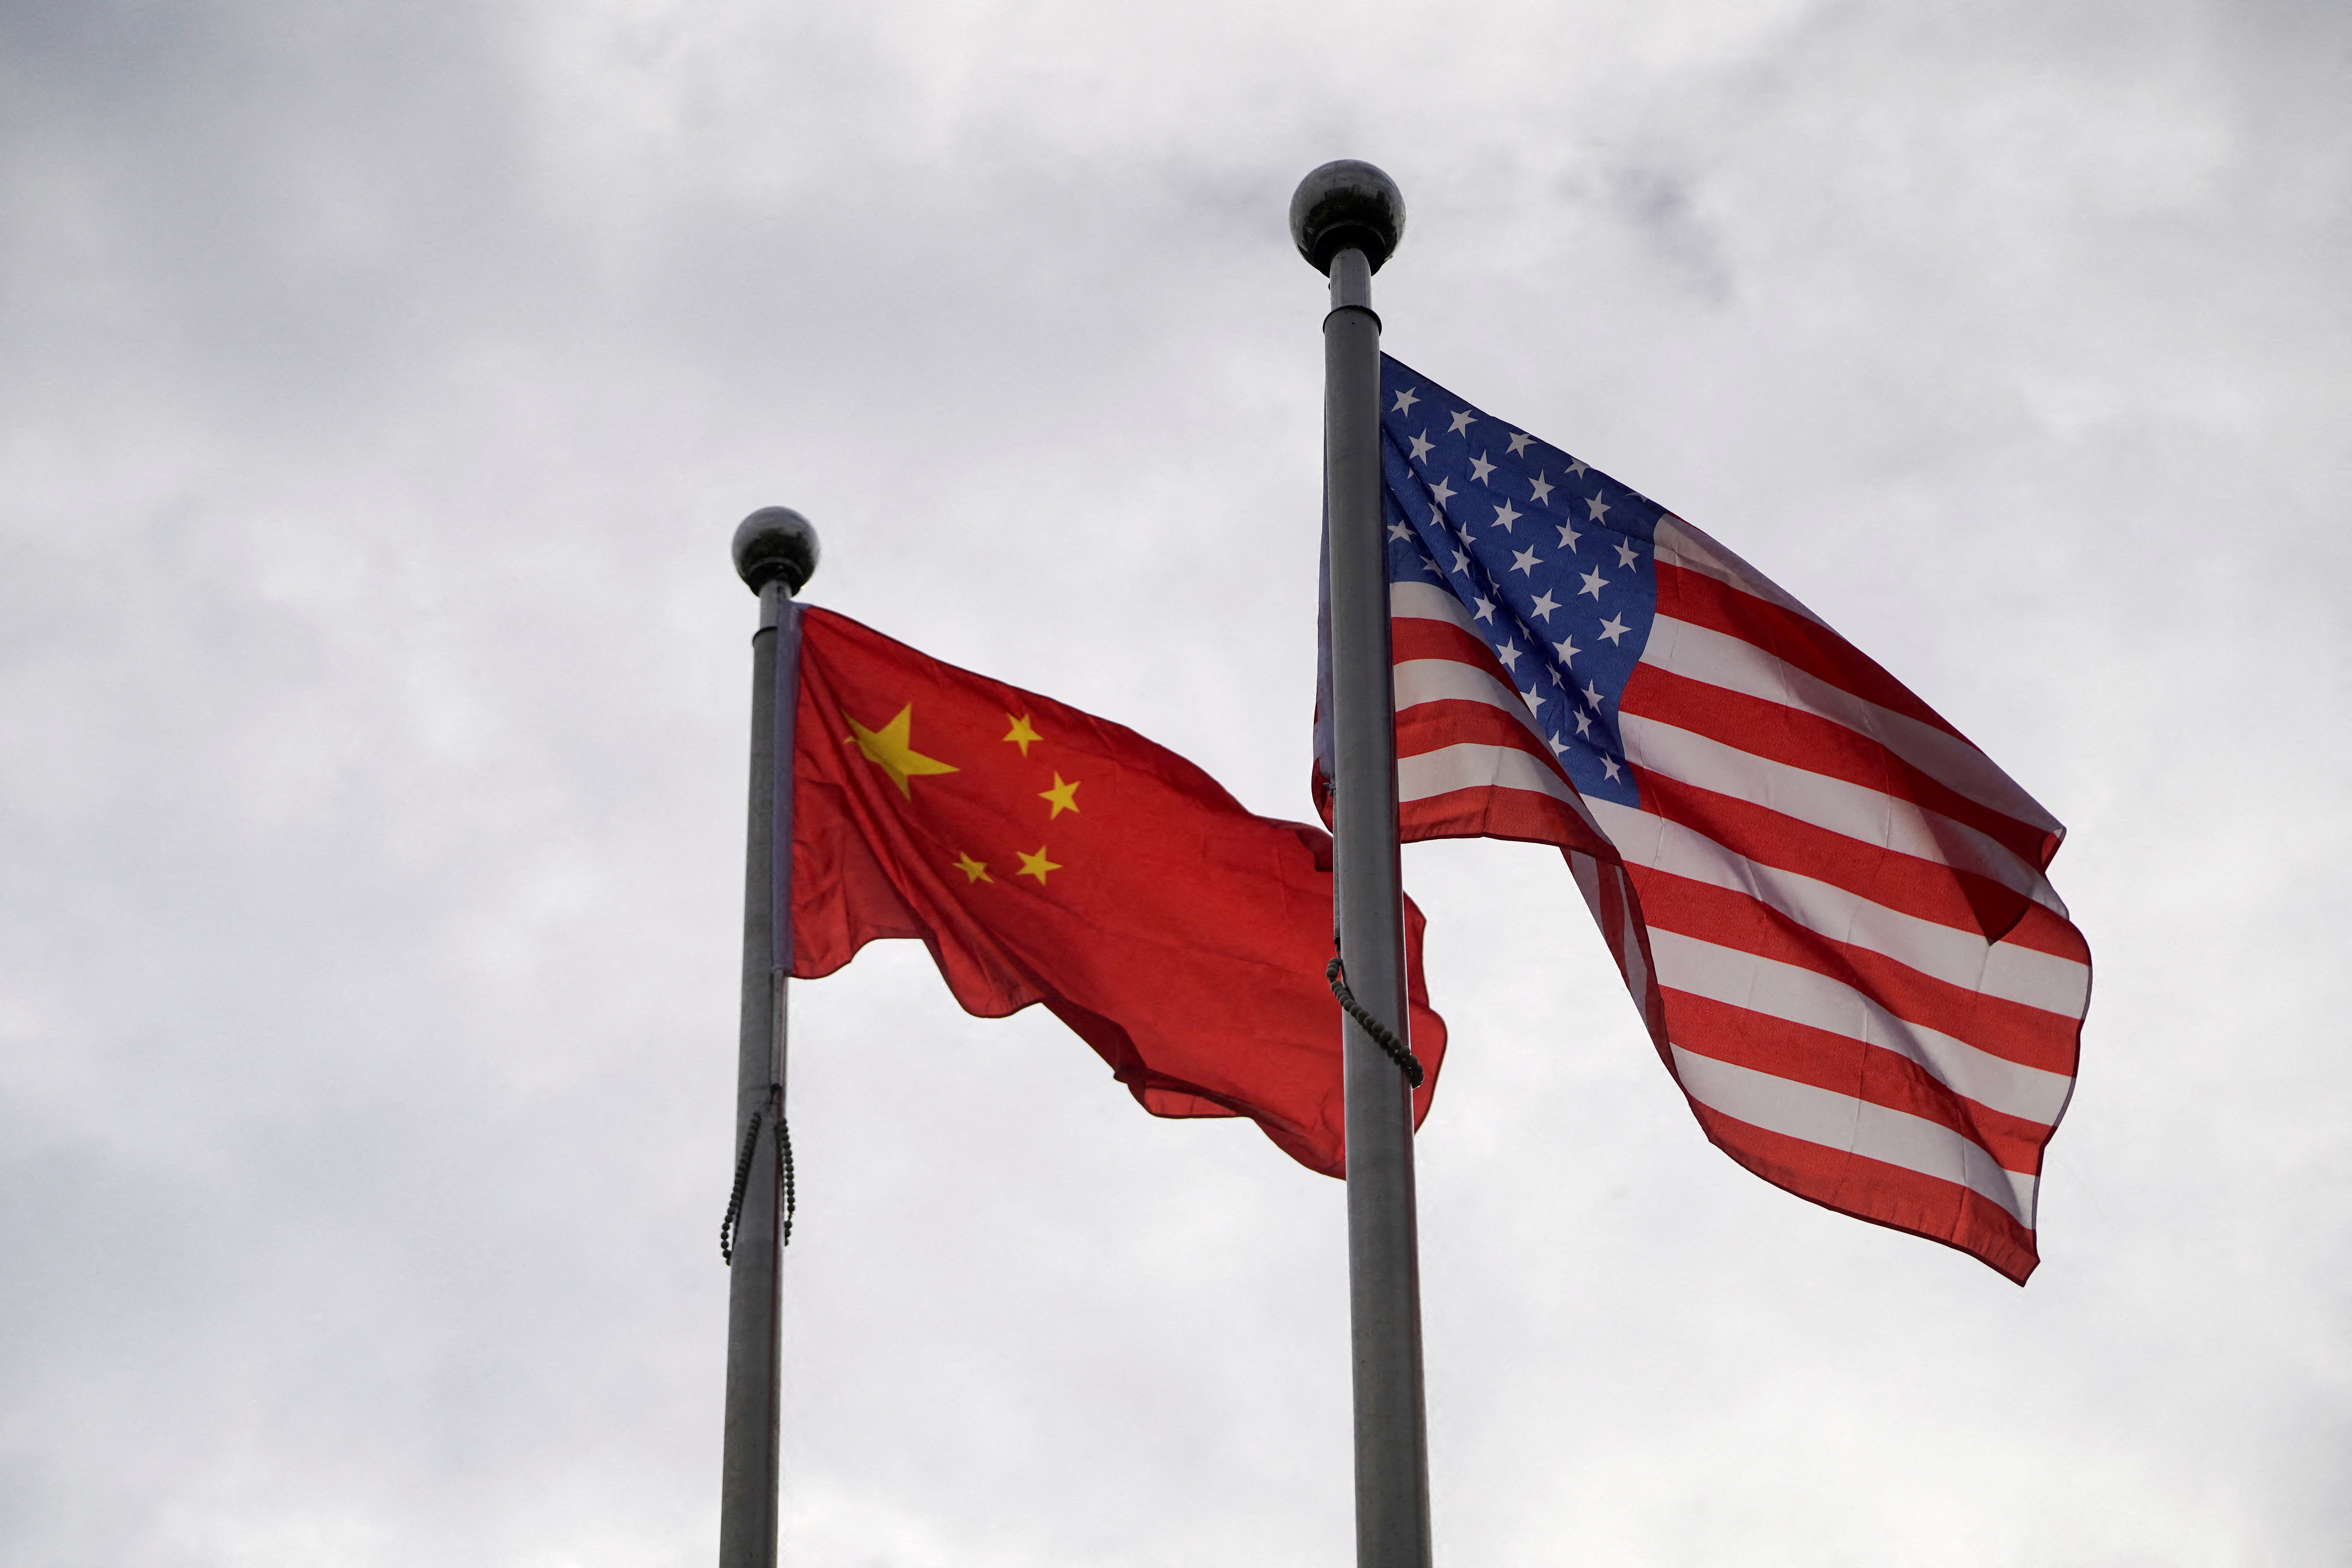 Chinese and U.S. flags flutter outside a company building in Shanghai, China November 16, 2021. REUTERS/Aly Song